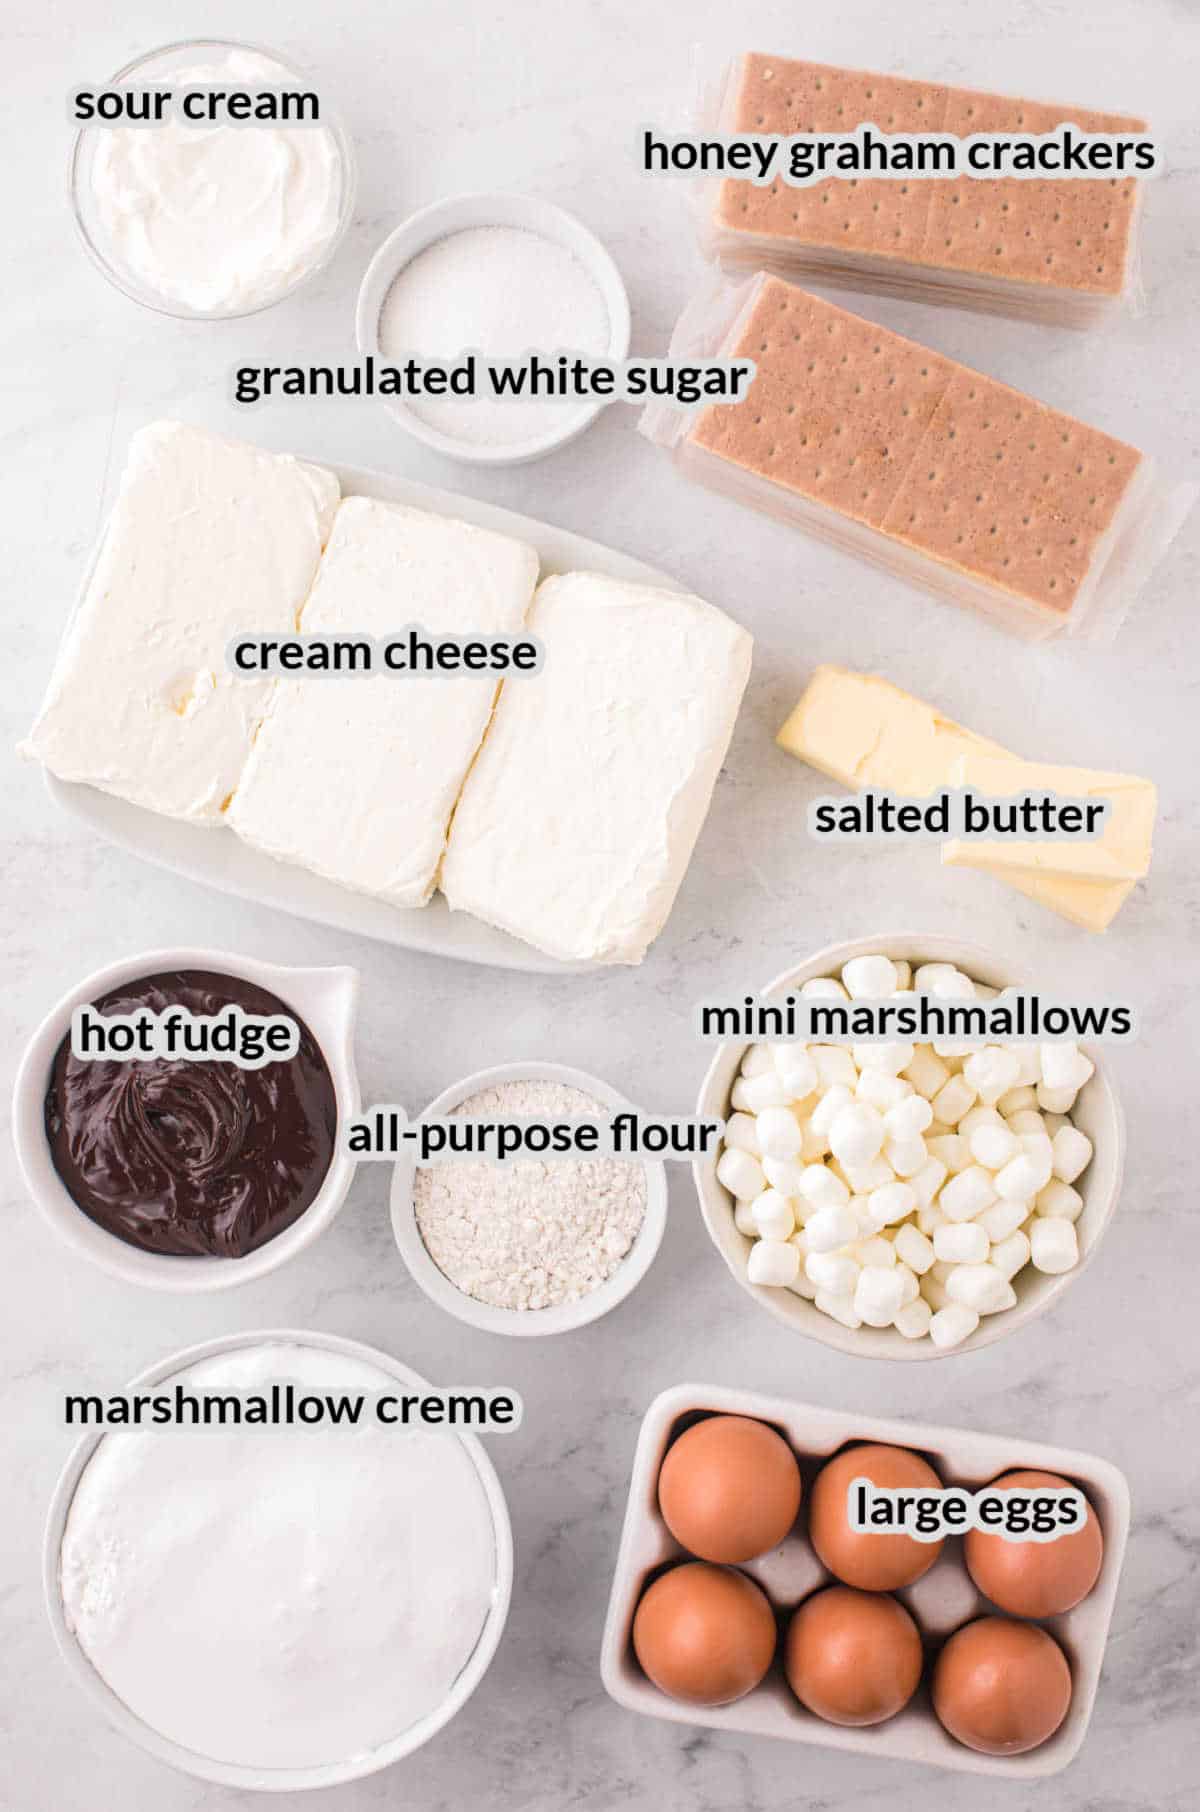 Overhead Image of S'mores Cheesecake Ingredients